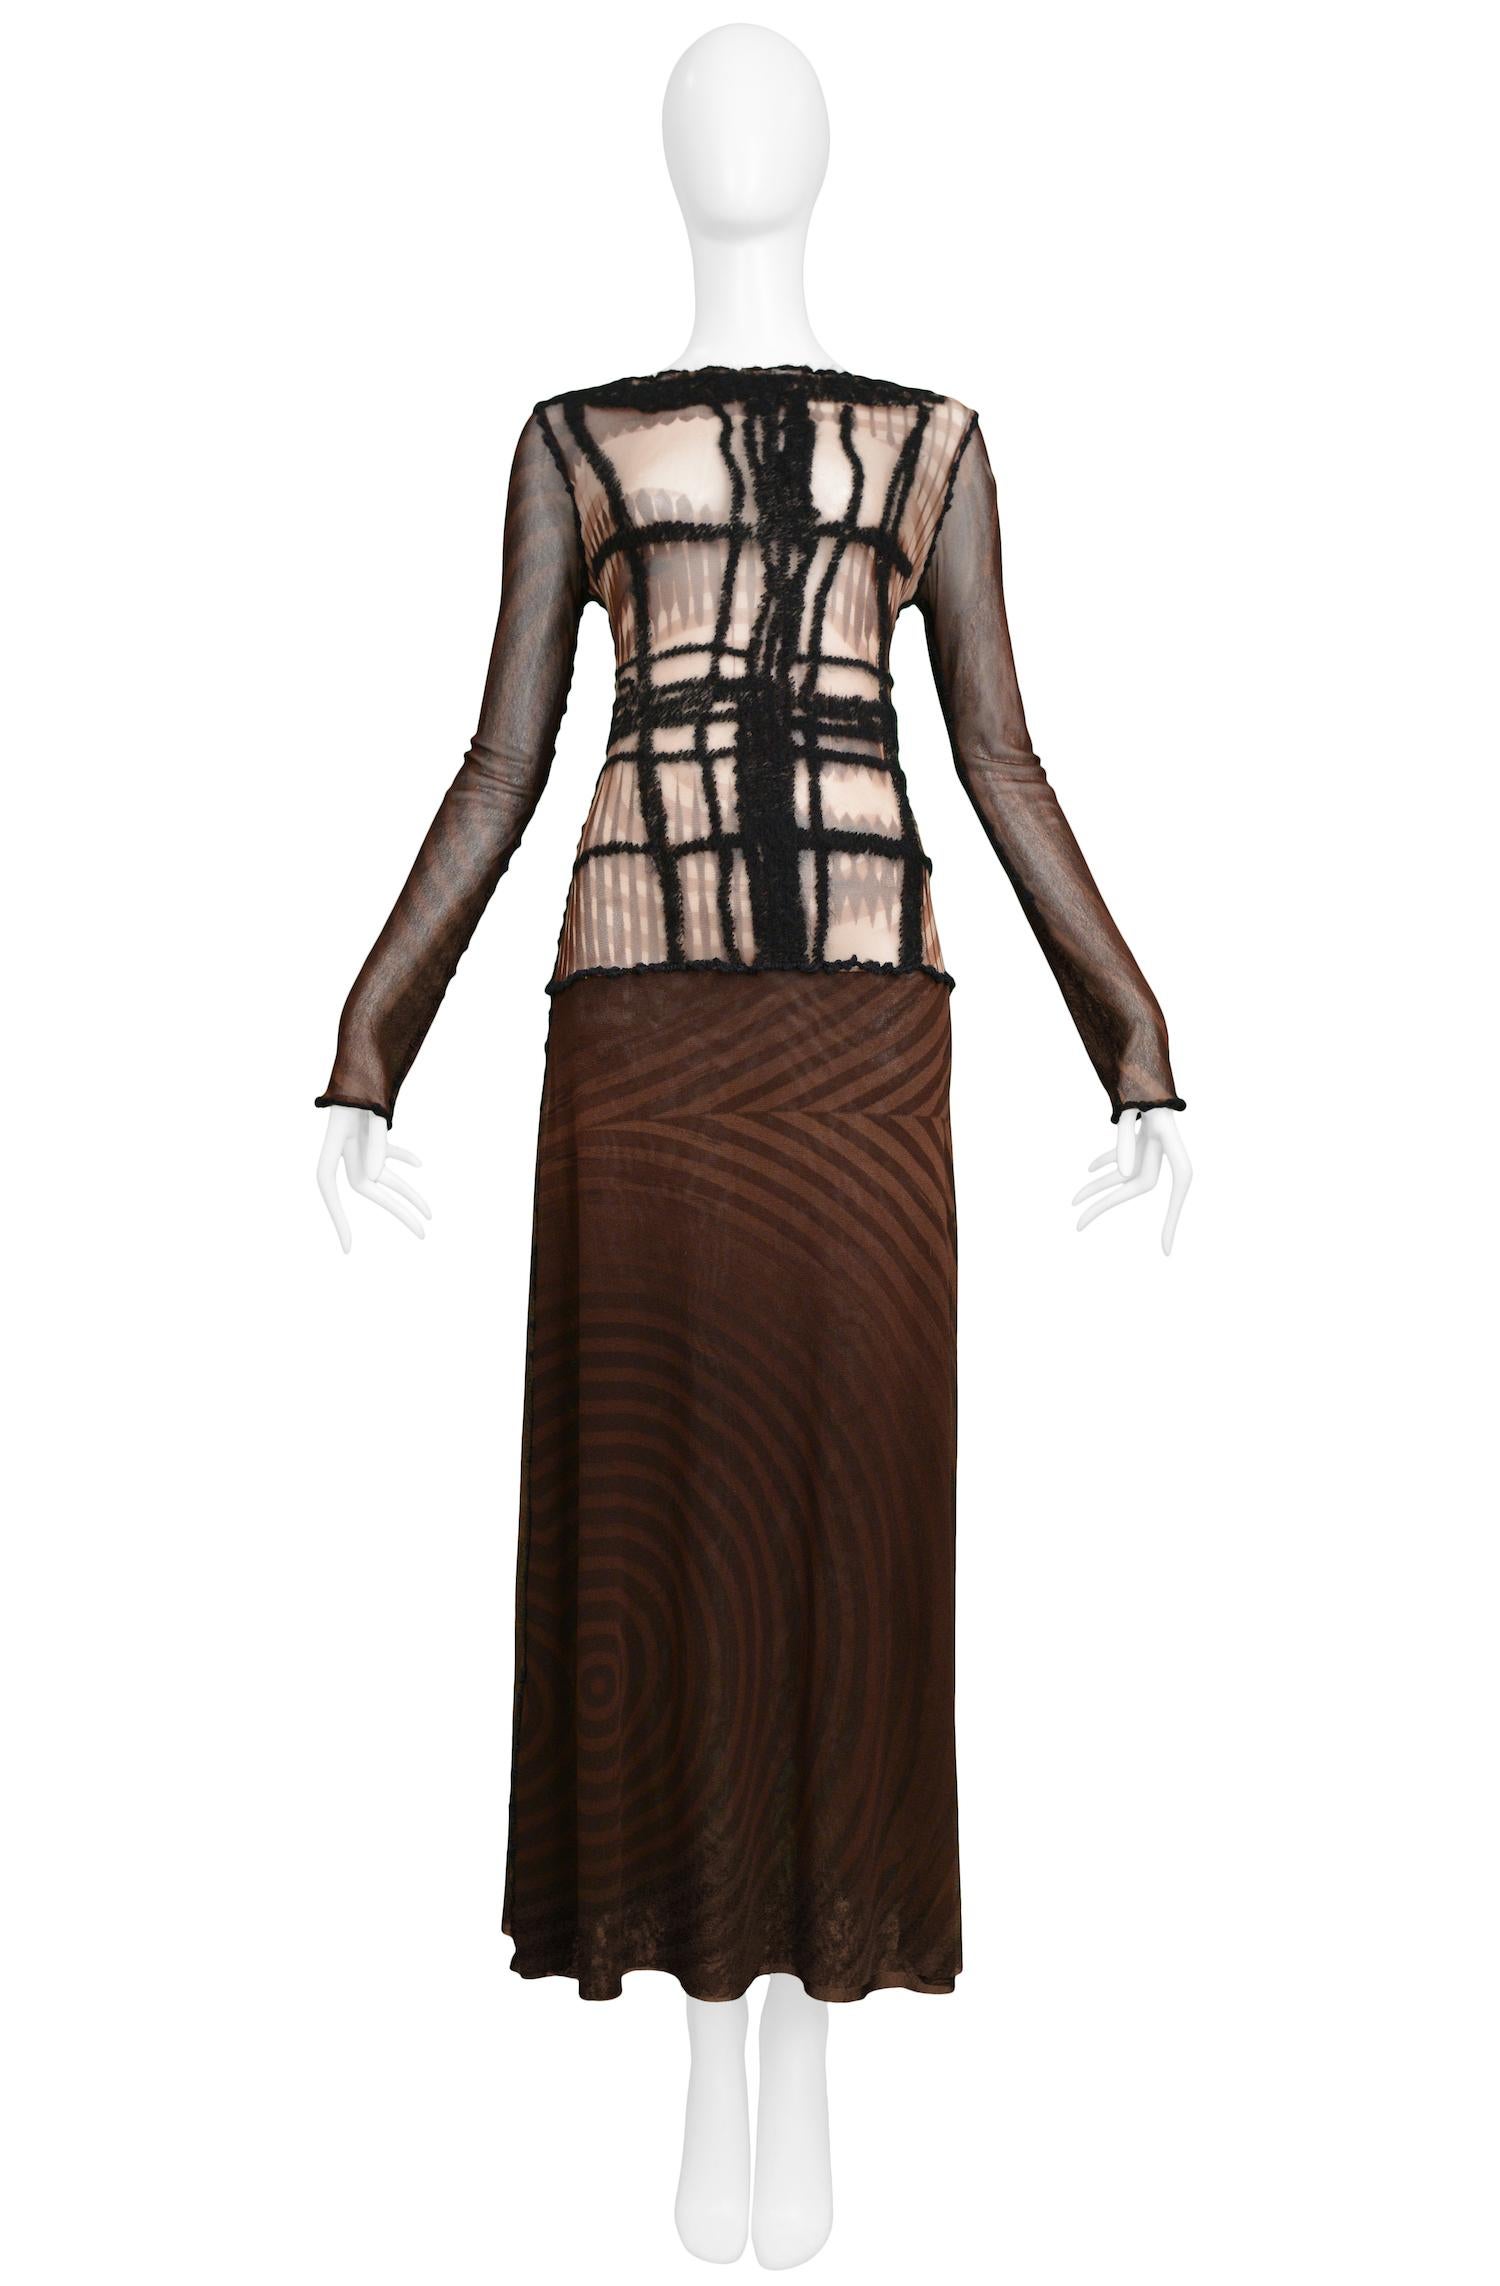 Vintage Jean Paul Gaultier brown long-sleeved mesh dress with a print of a face on the torso, dropped waist, and yarn detailing on front torso.

Excellent Vintage Condition.

Size: Medium

Measurements:
Bust 30